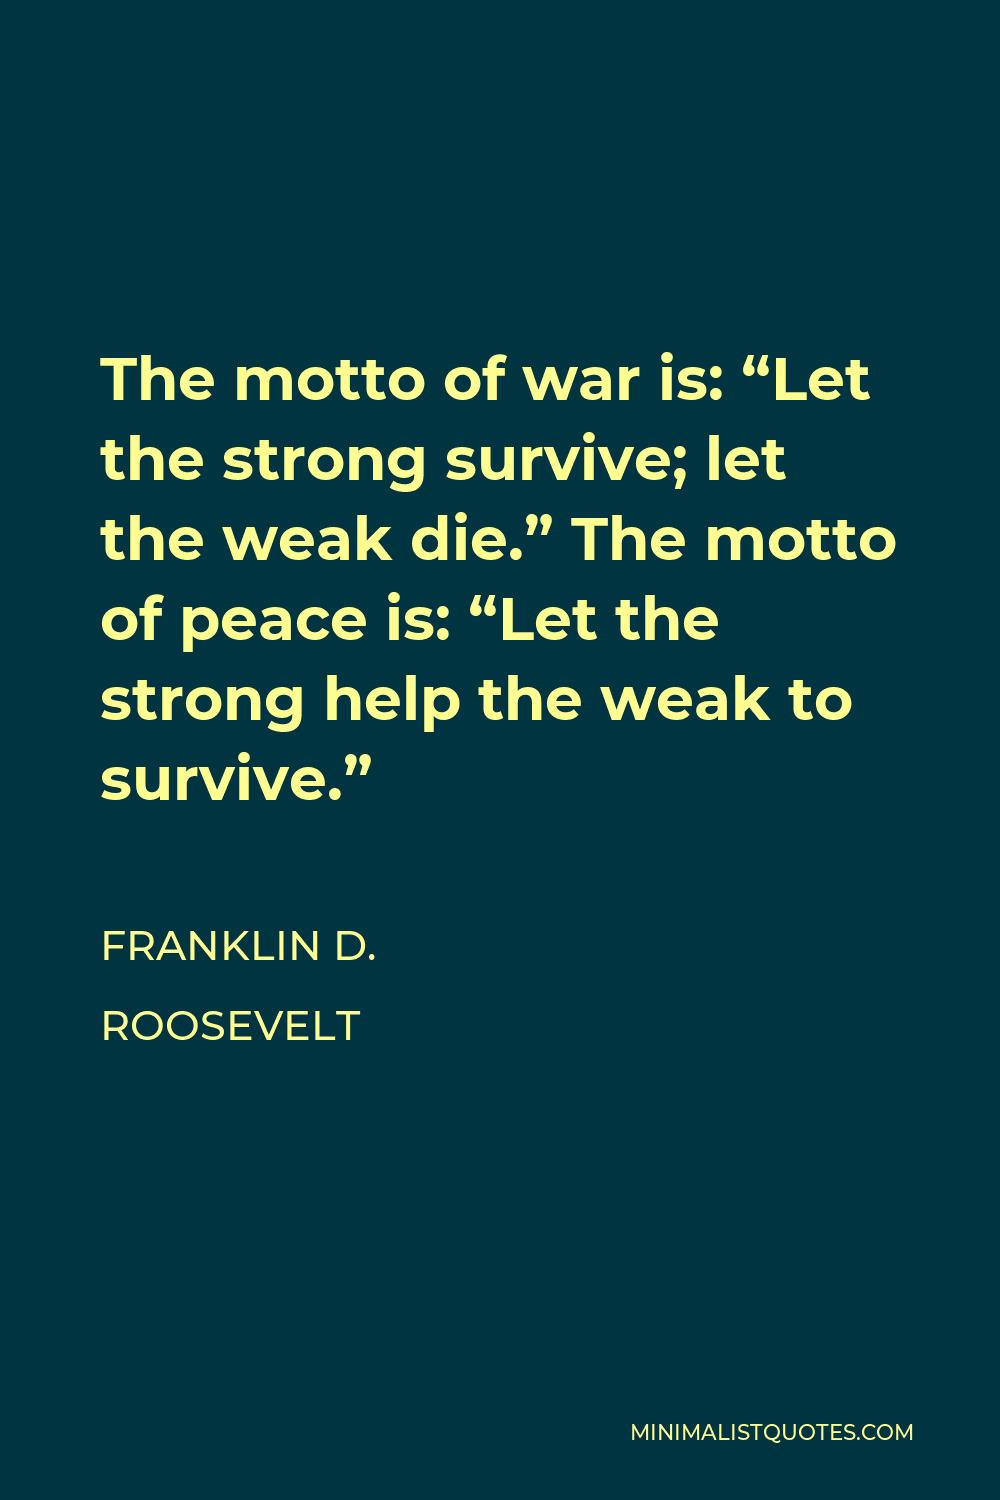 Franklin D. Roosevelt Quote - The motto of war is: “Let the strong survive; let the weak die.” The motto of peace is: “Let the strong help the weak to survive.”